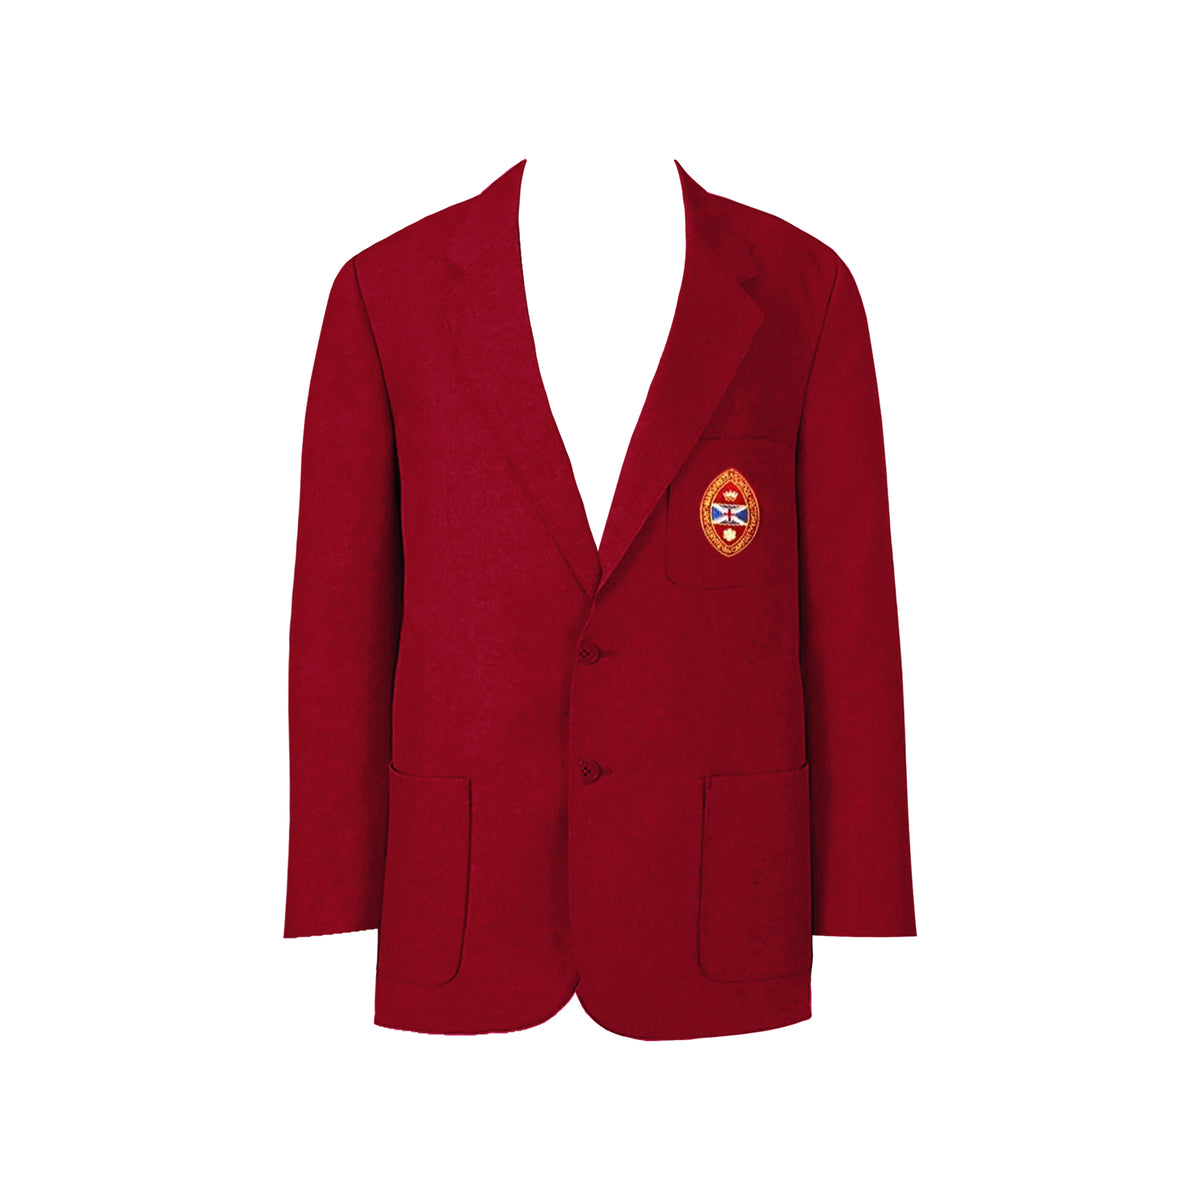 SMS EMBROIDERED GIRLS BLAZER, MELTON, RED BUTTONS, YOUTH